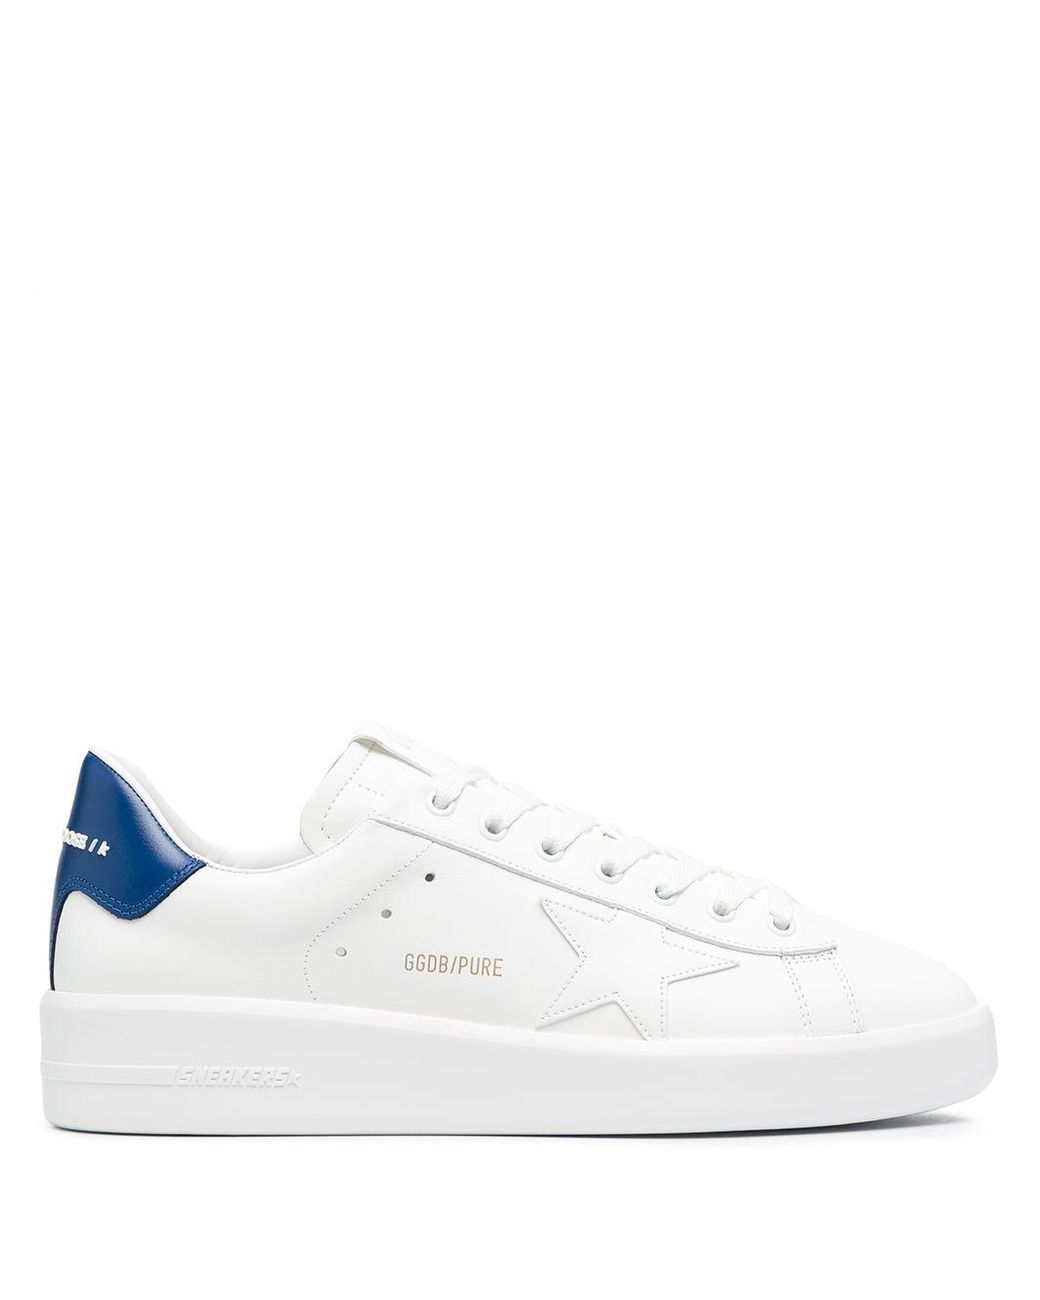 Golden Goose Deluxe Brand Leather Purestar Sneakers in White for Men - Lyst